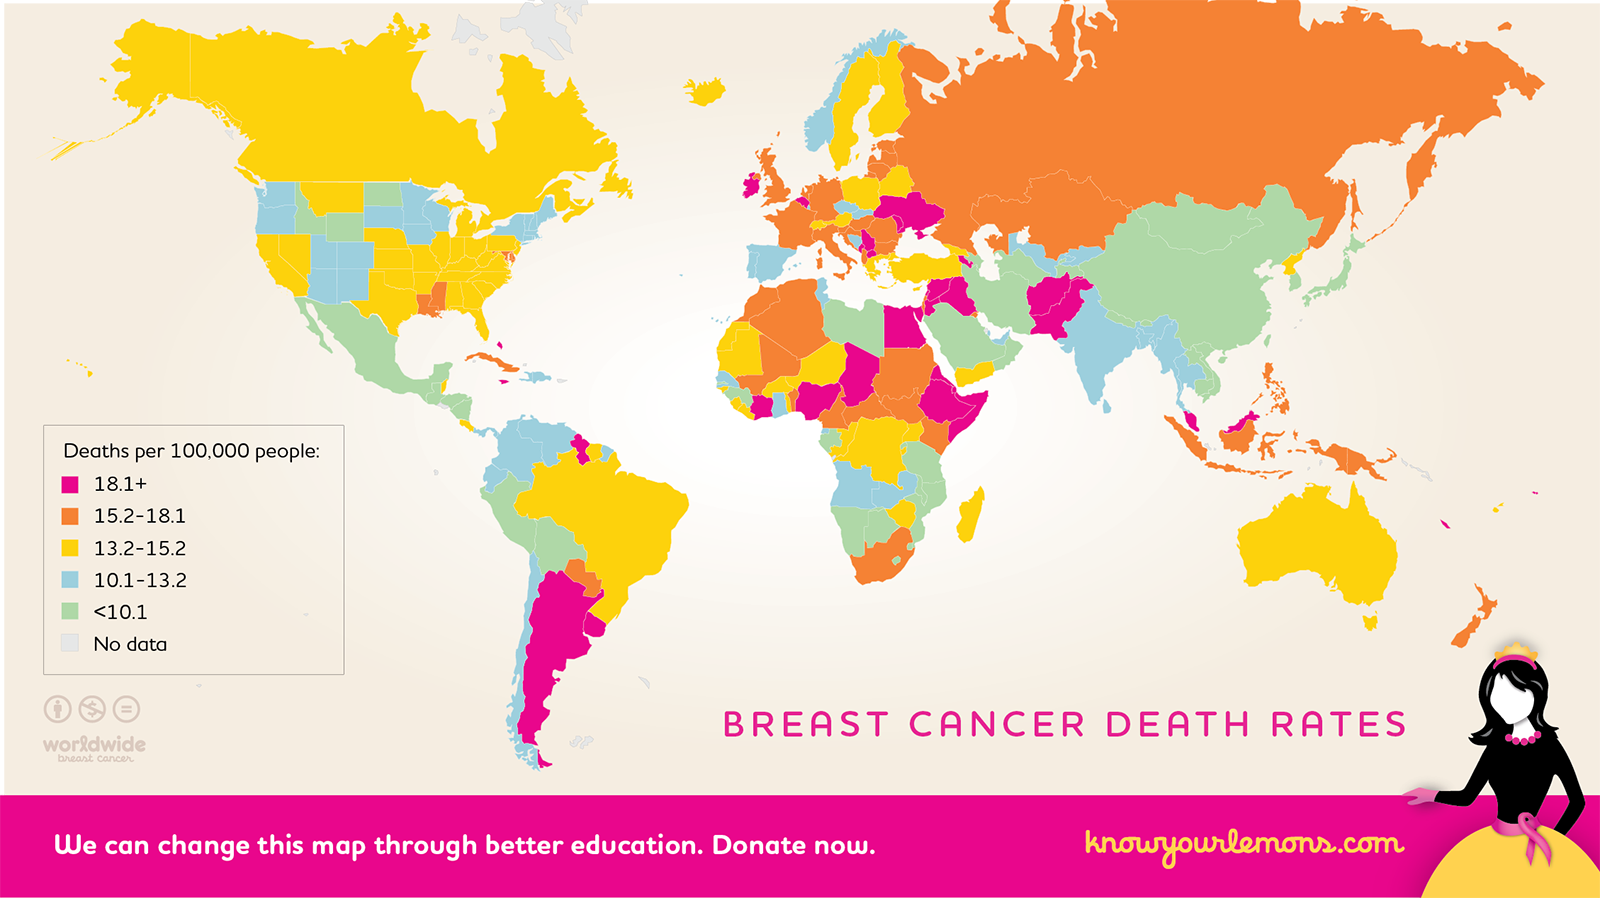 Breast cancer death rates